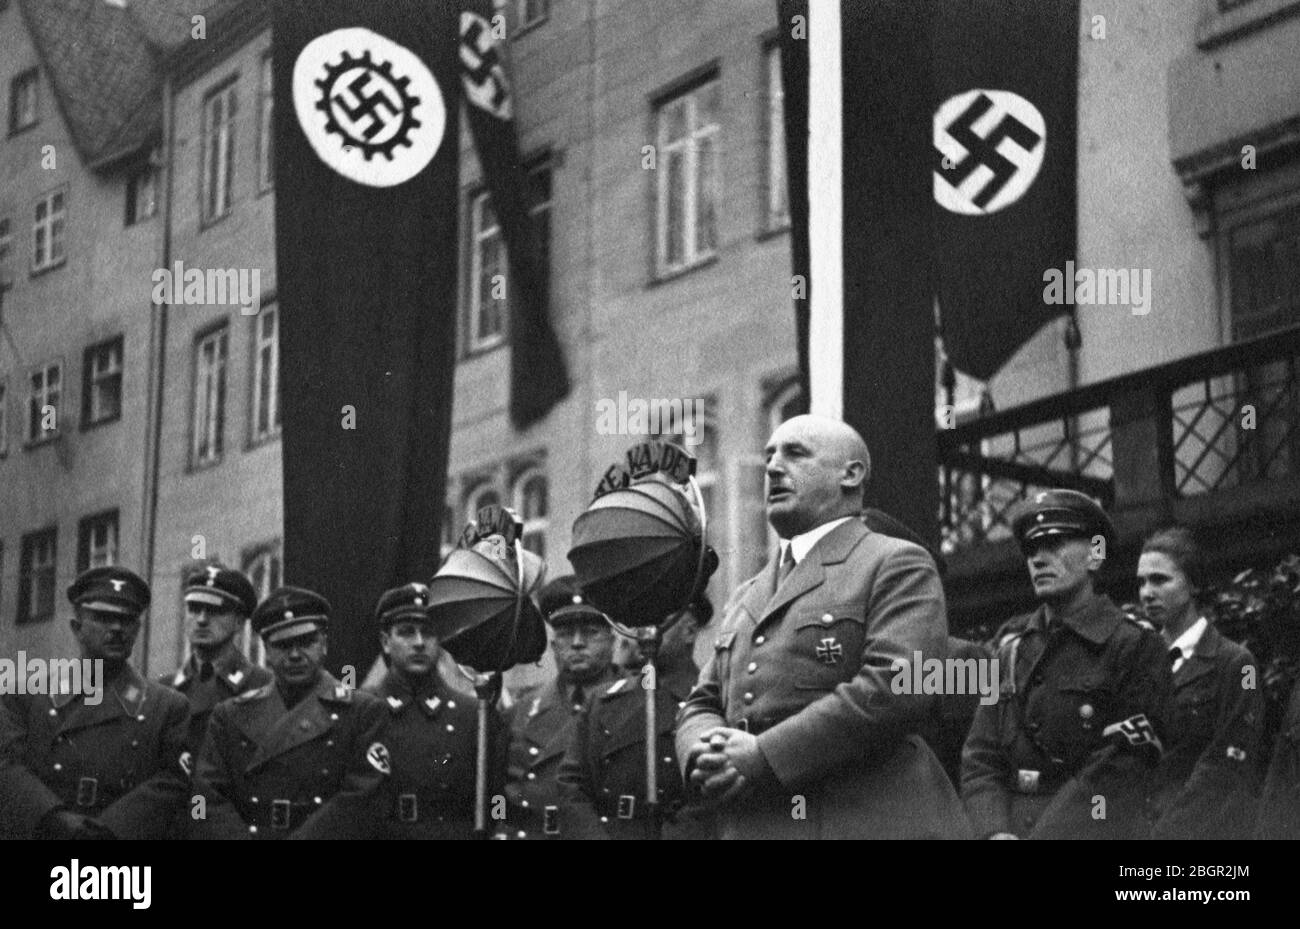 Gauleiter Julius Streicher (1885-1946), delivering a speech at the 'opening of the Third Craft Competitions of the Province of Franconia on the Adolf Hitler Square, Nurnberg, February 2, 1936, German Worker's Front, Franconia.'  Streicher was addressing ranks of uniformed men and boys. Note the big round baffles covering and protecting the microphones from rain and wind.  Streicher was one of Hitler's earliest supporters and rewarded him with protection against whoever hated Streicher's anti-Jewish rantings and publications. To see my other WW II-related images, Search:  Prestor vintage WW II Stock Photo